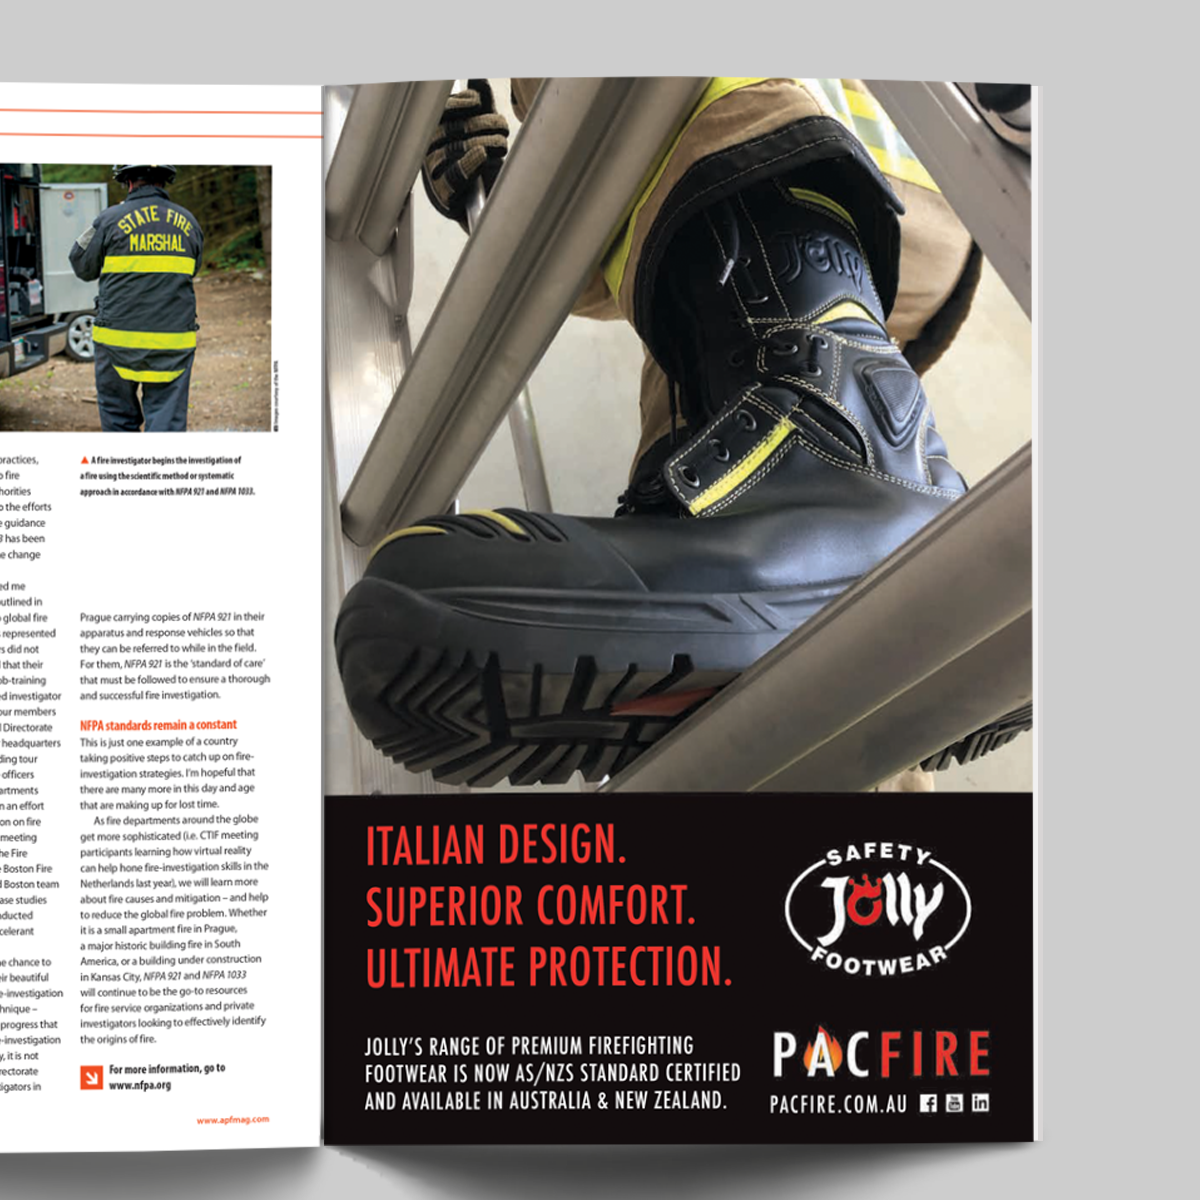 Jolly Firefighting Footwear arrives at Pac Fire